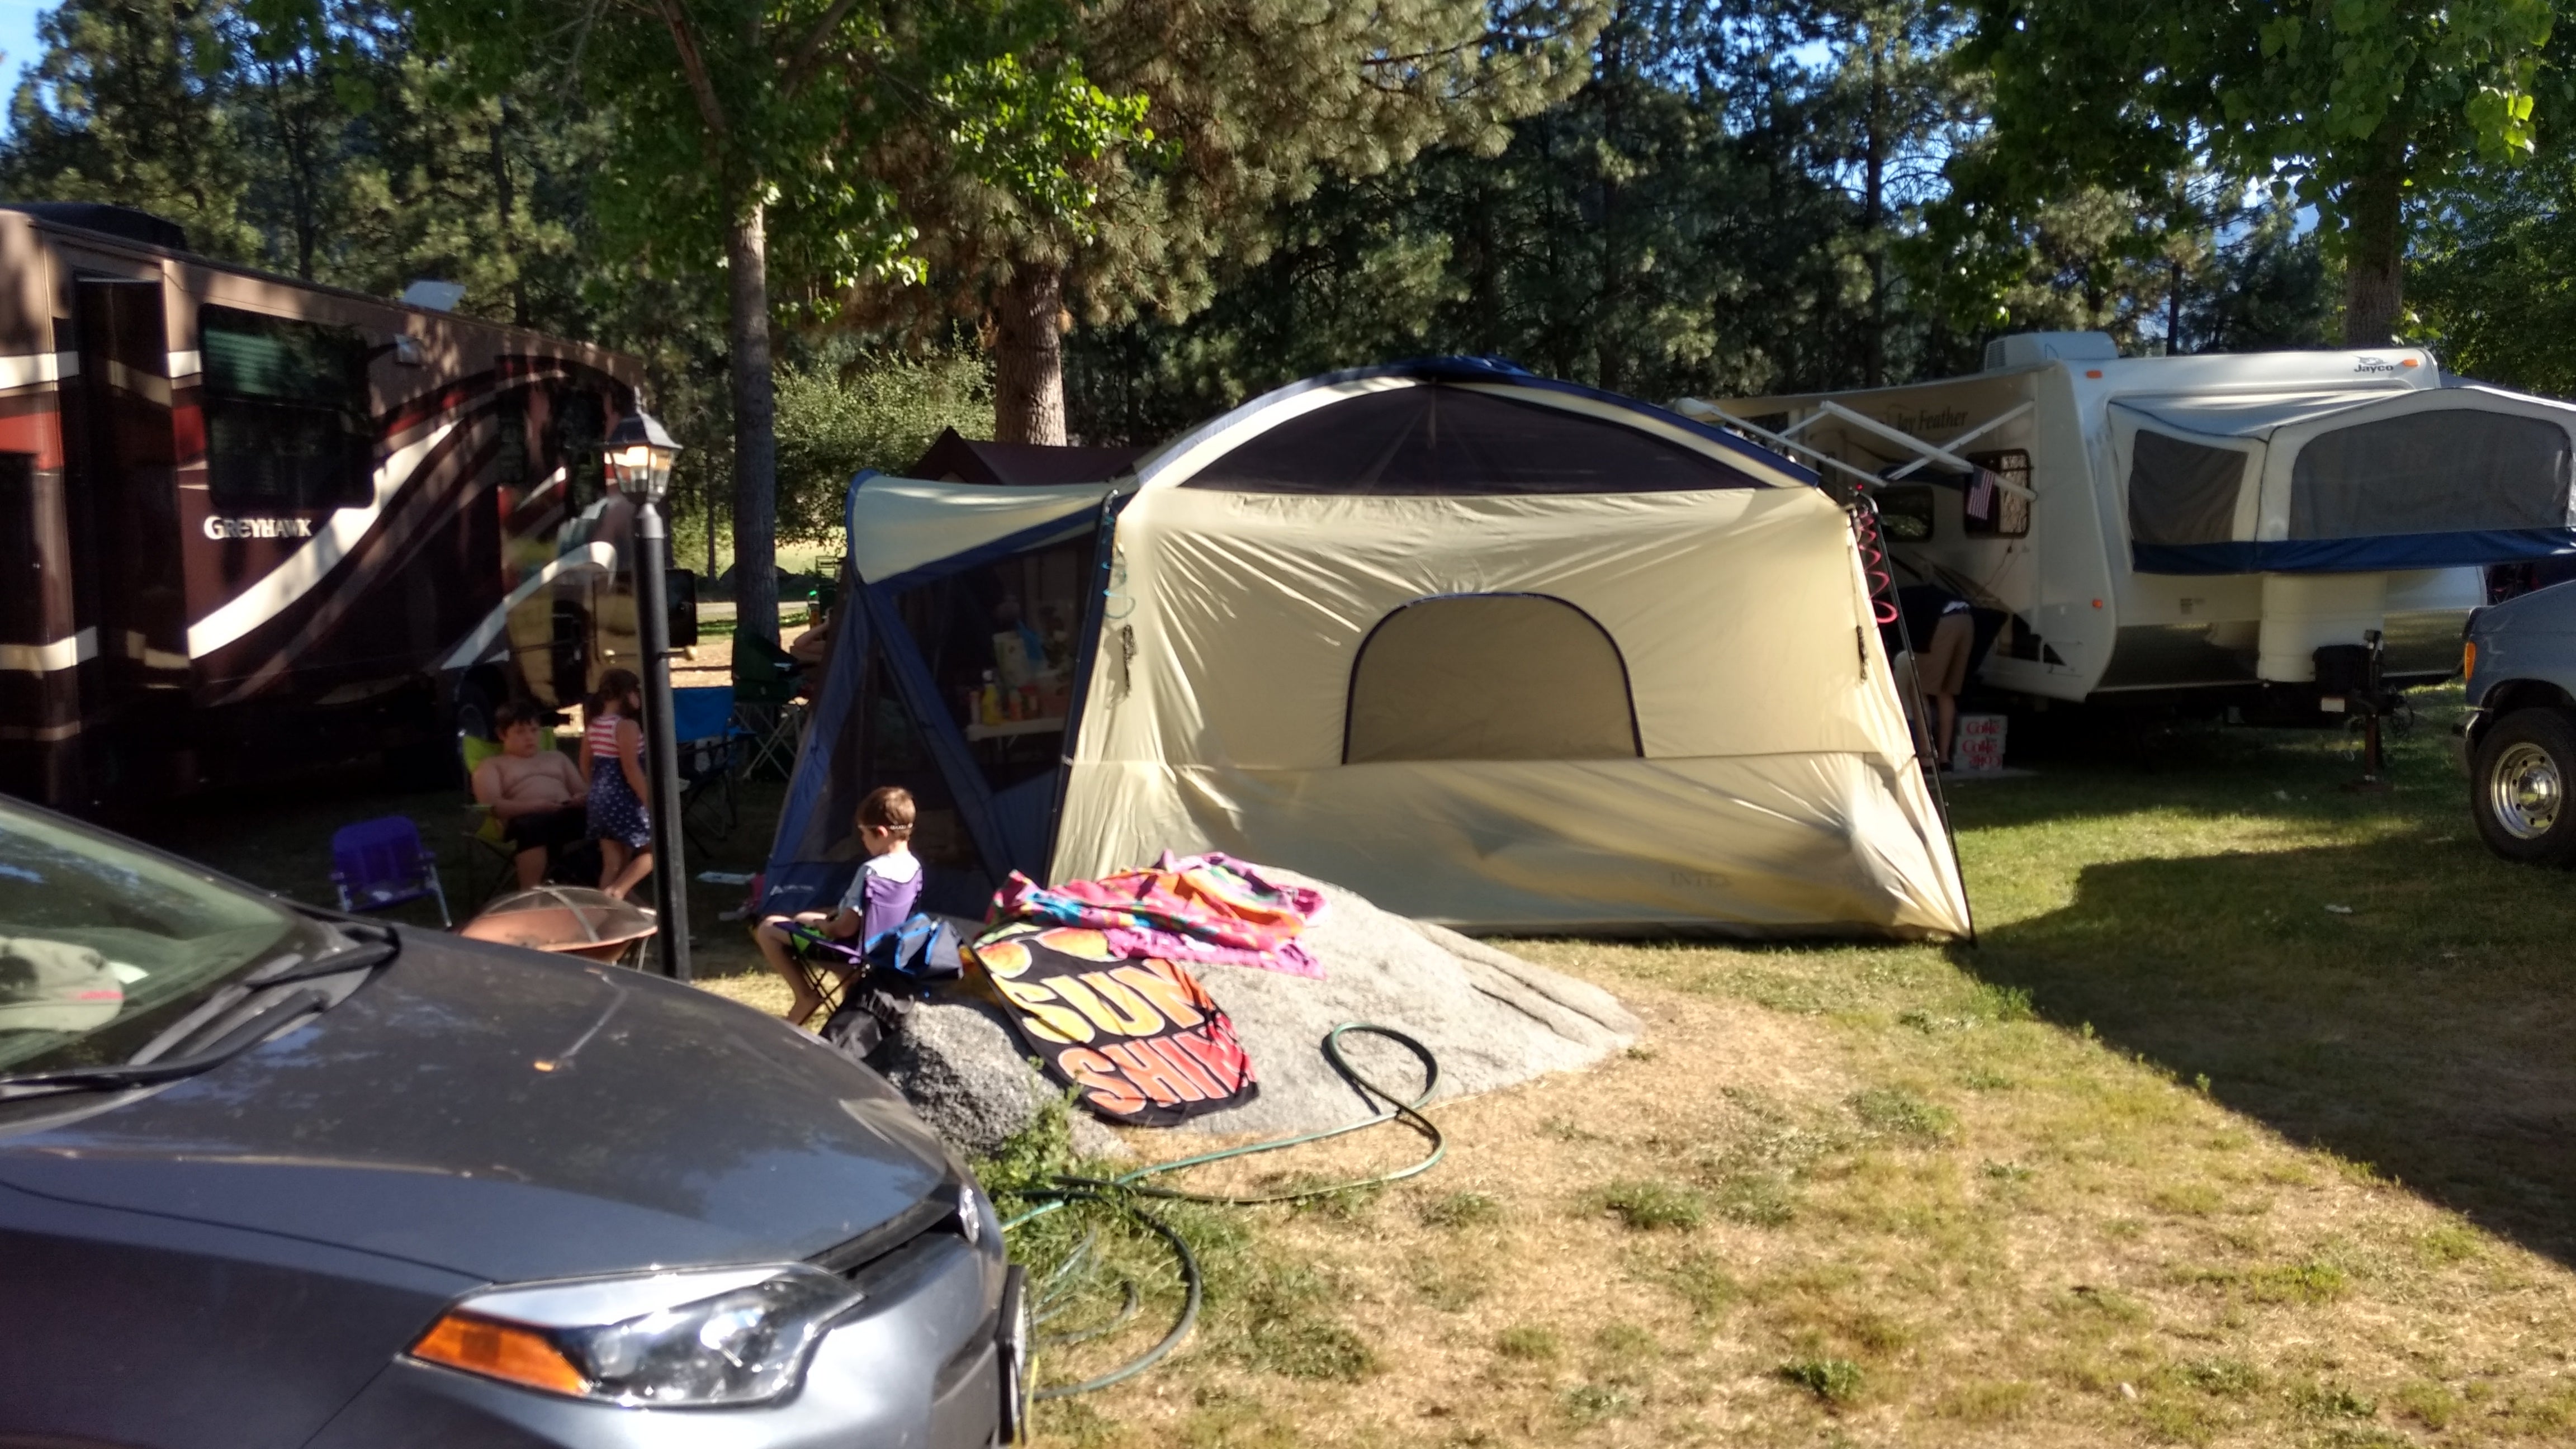 Camper submitted image from Leavenworth-Pine Village KOA - 4